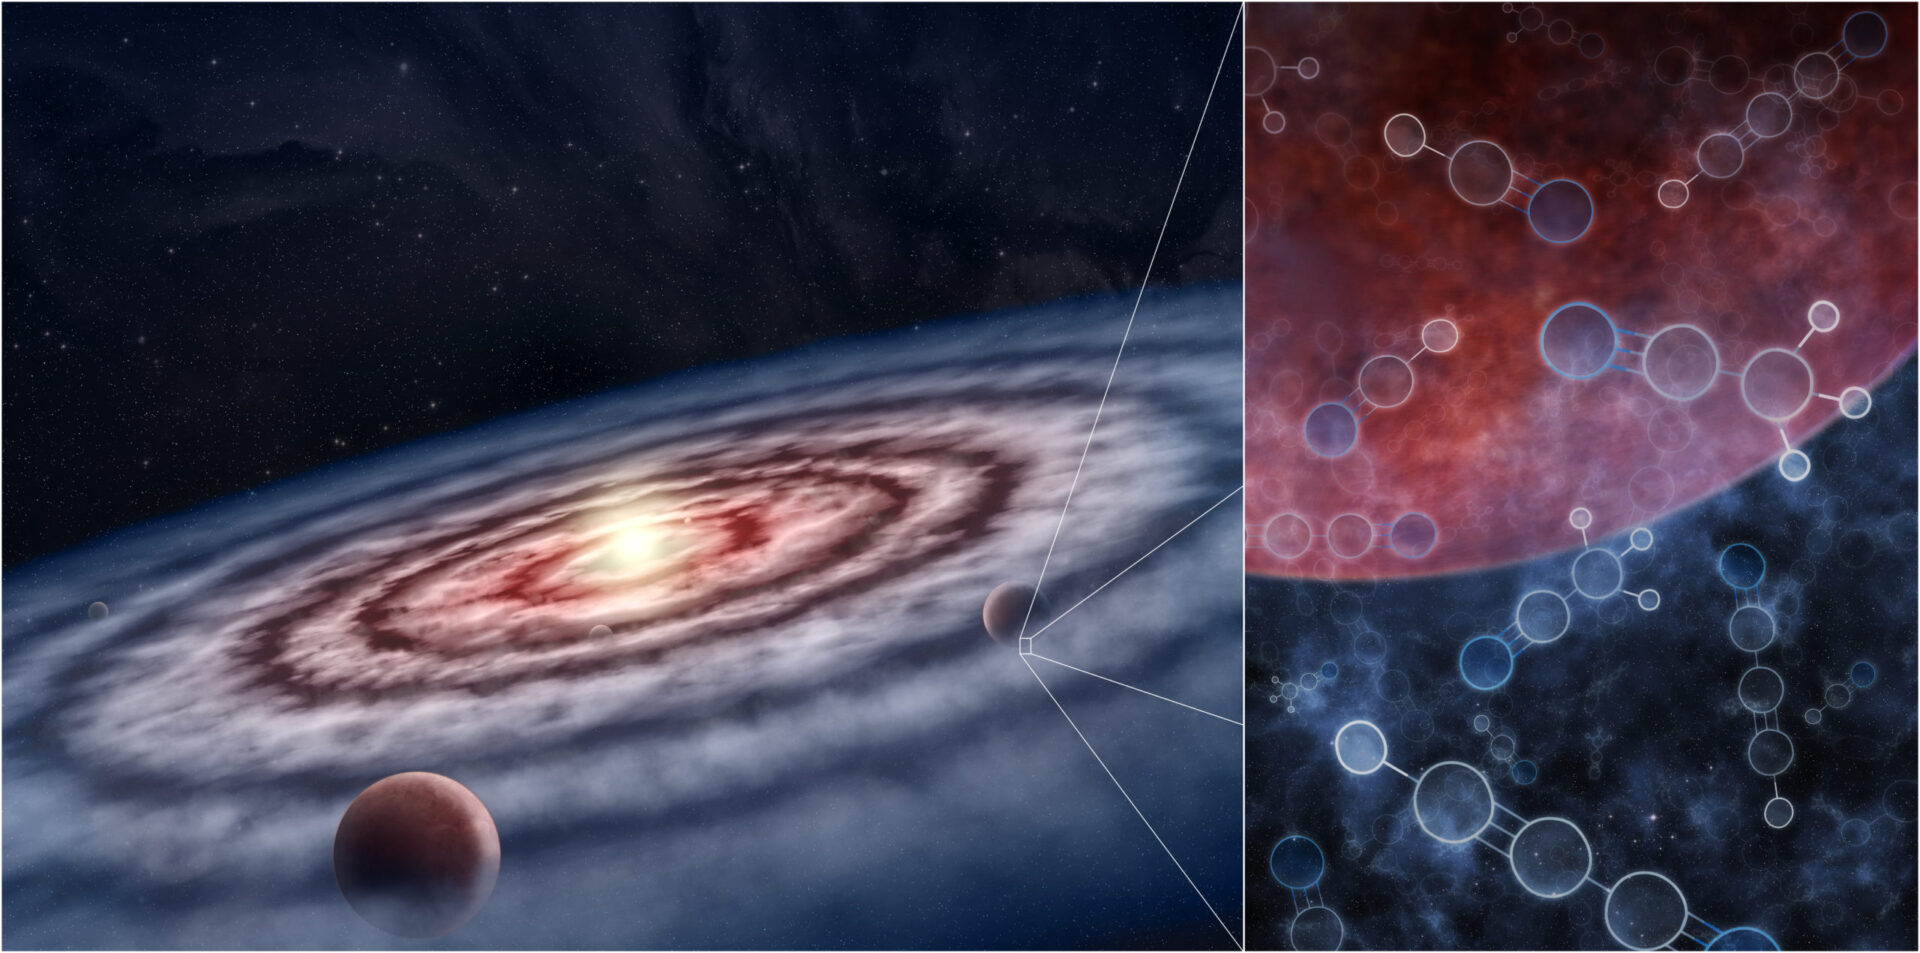 <p>In this artist's conception, planets form from the gas and dust in the protoplanetary disk surrounding the young star. The gas is made up of many different molecules, including hydrogen cyanide and more complex nitriles—linked to the development of life on Earth—and other organic and inorganic compounds. From simple organic compounds to the more complex, the soup of molecules in a particular location in the disk shapes the future of the planet forming there, and determines whether or not that planet could support life as we know it. Credit: M.Weiss/Center for Astrophysics | Harvard & Smithsonian</p>
